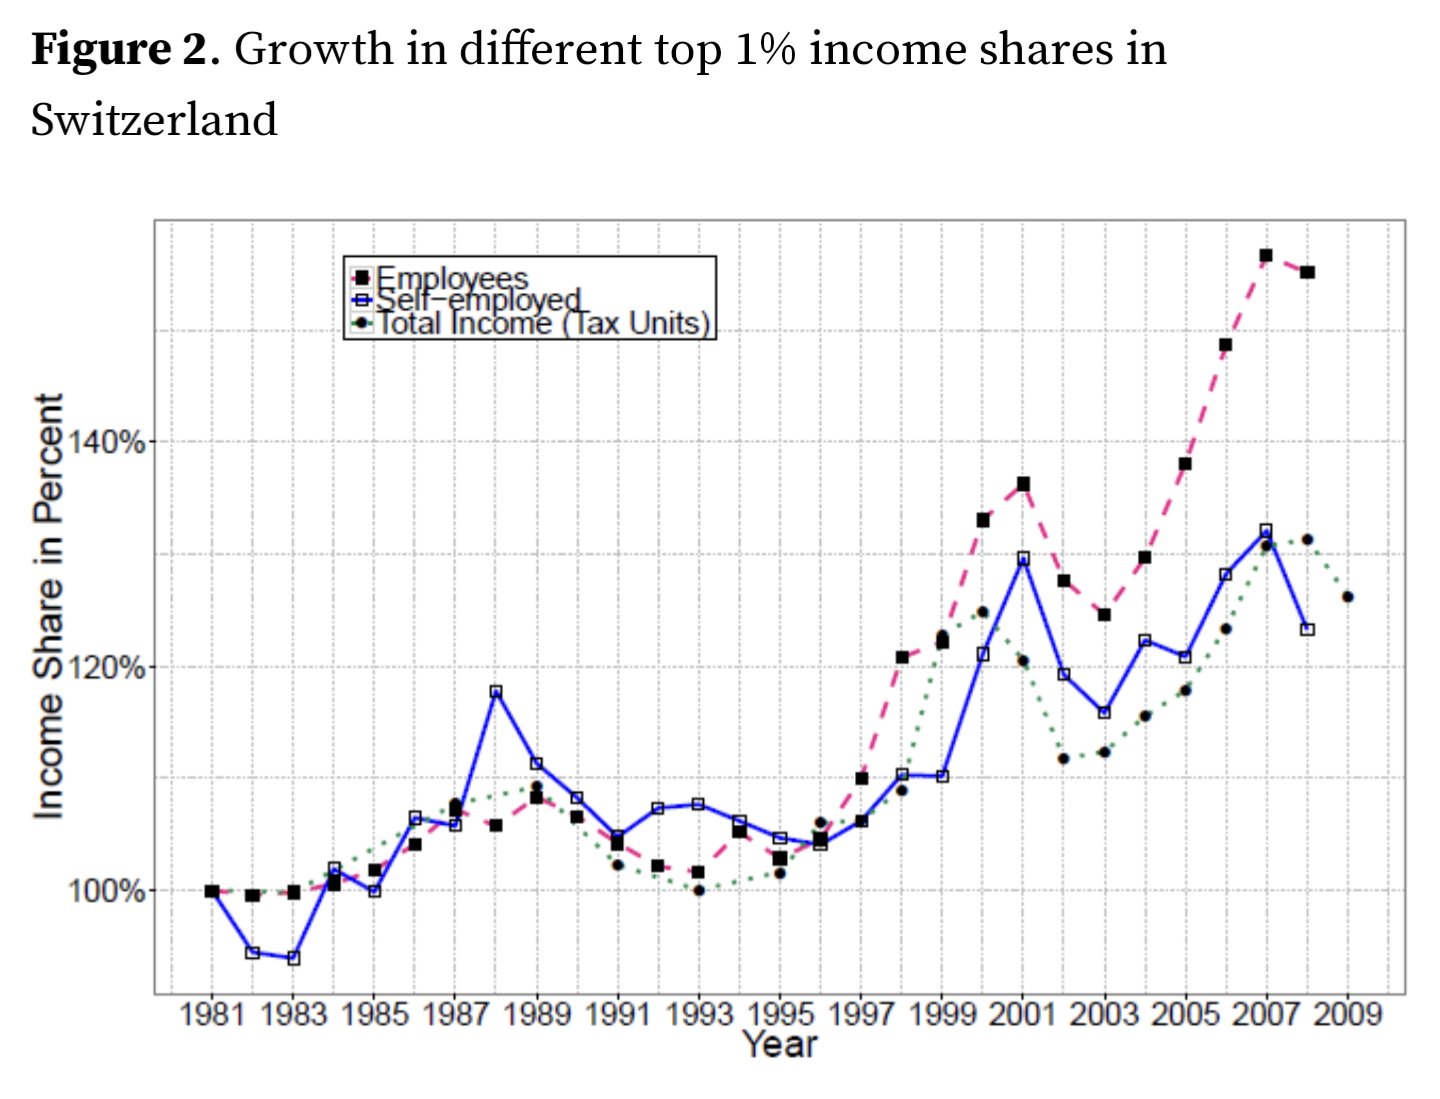 Switzerland inequality diagram from 1981-2009, kicking after ~1999